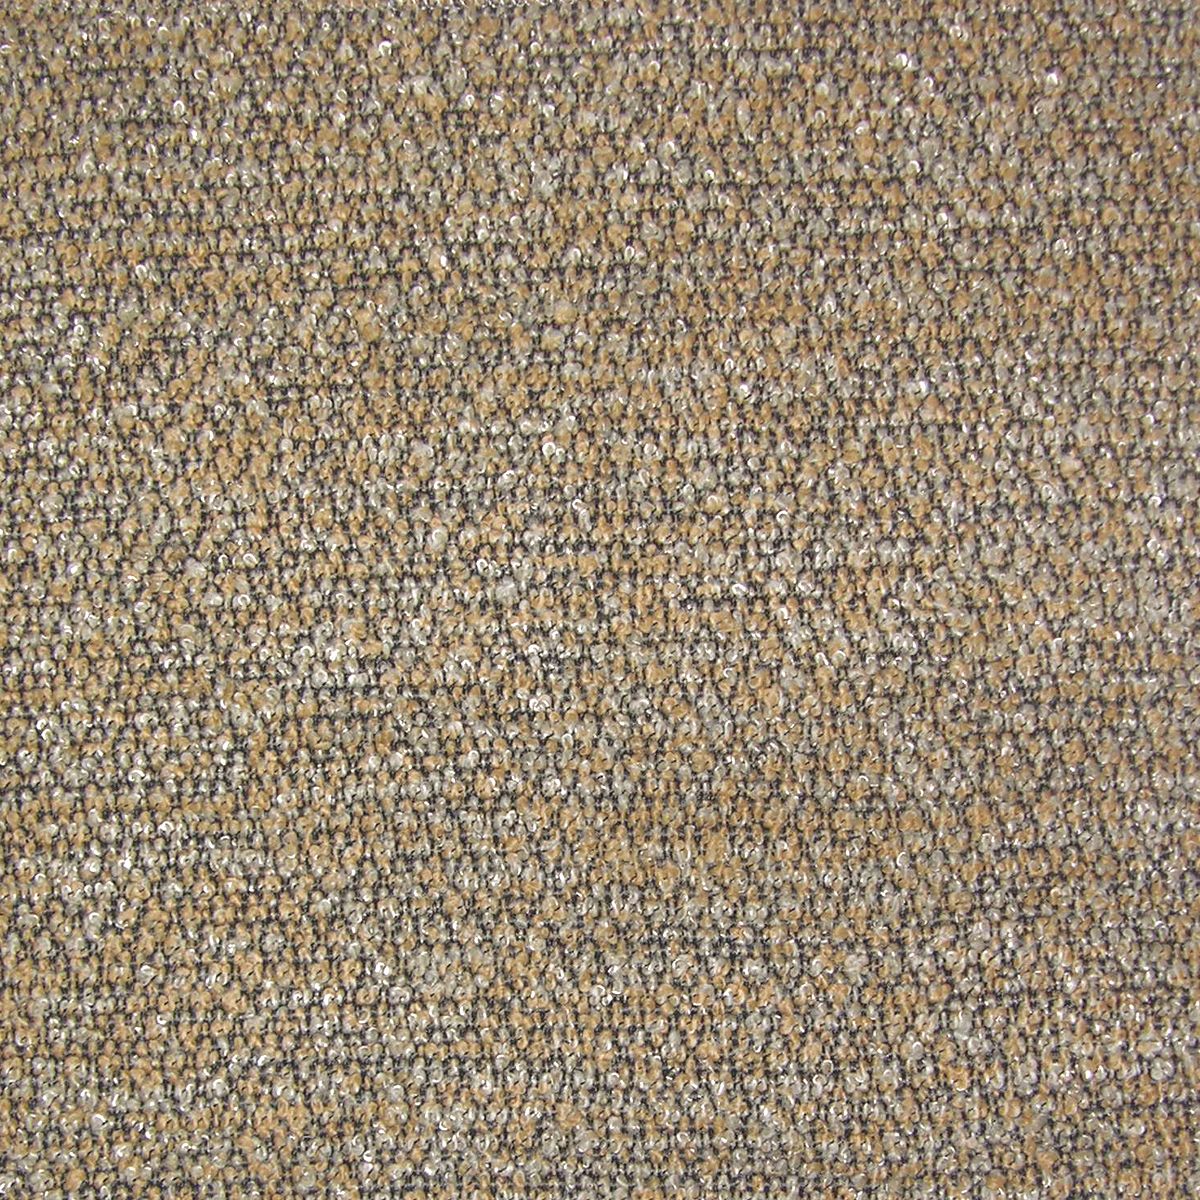 Elkin fabric in taupe color - pattern number VC 0087OK10 - by Scalamandre in the Old World Weavers collection